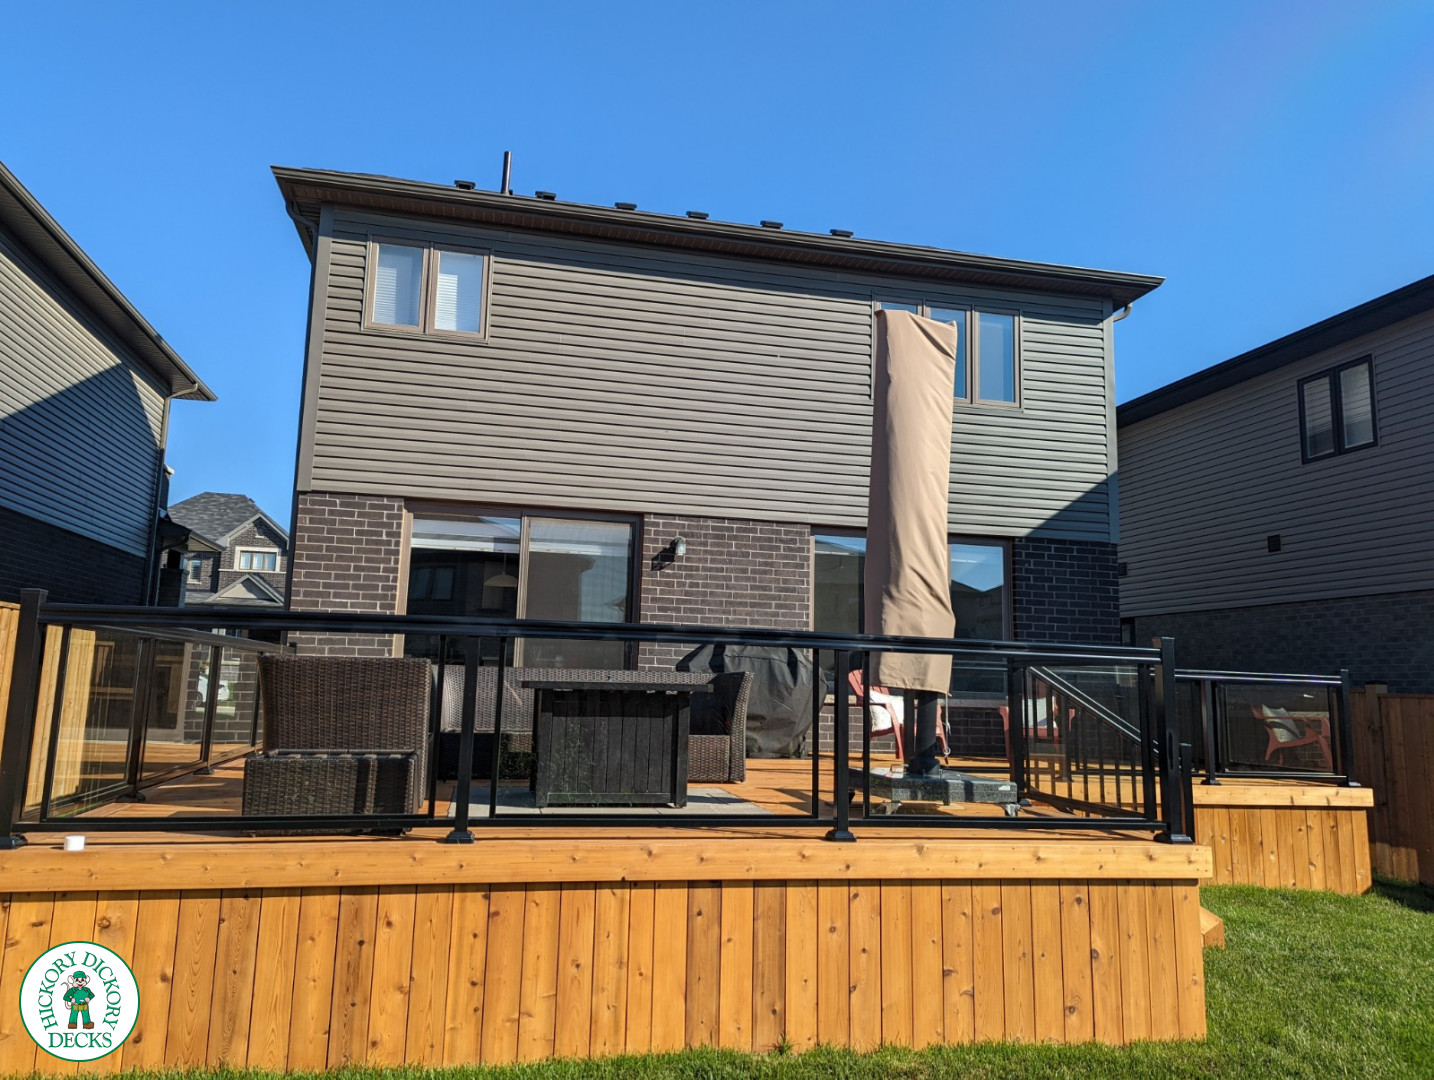 Large cedar deck with stairs, aluminum railing